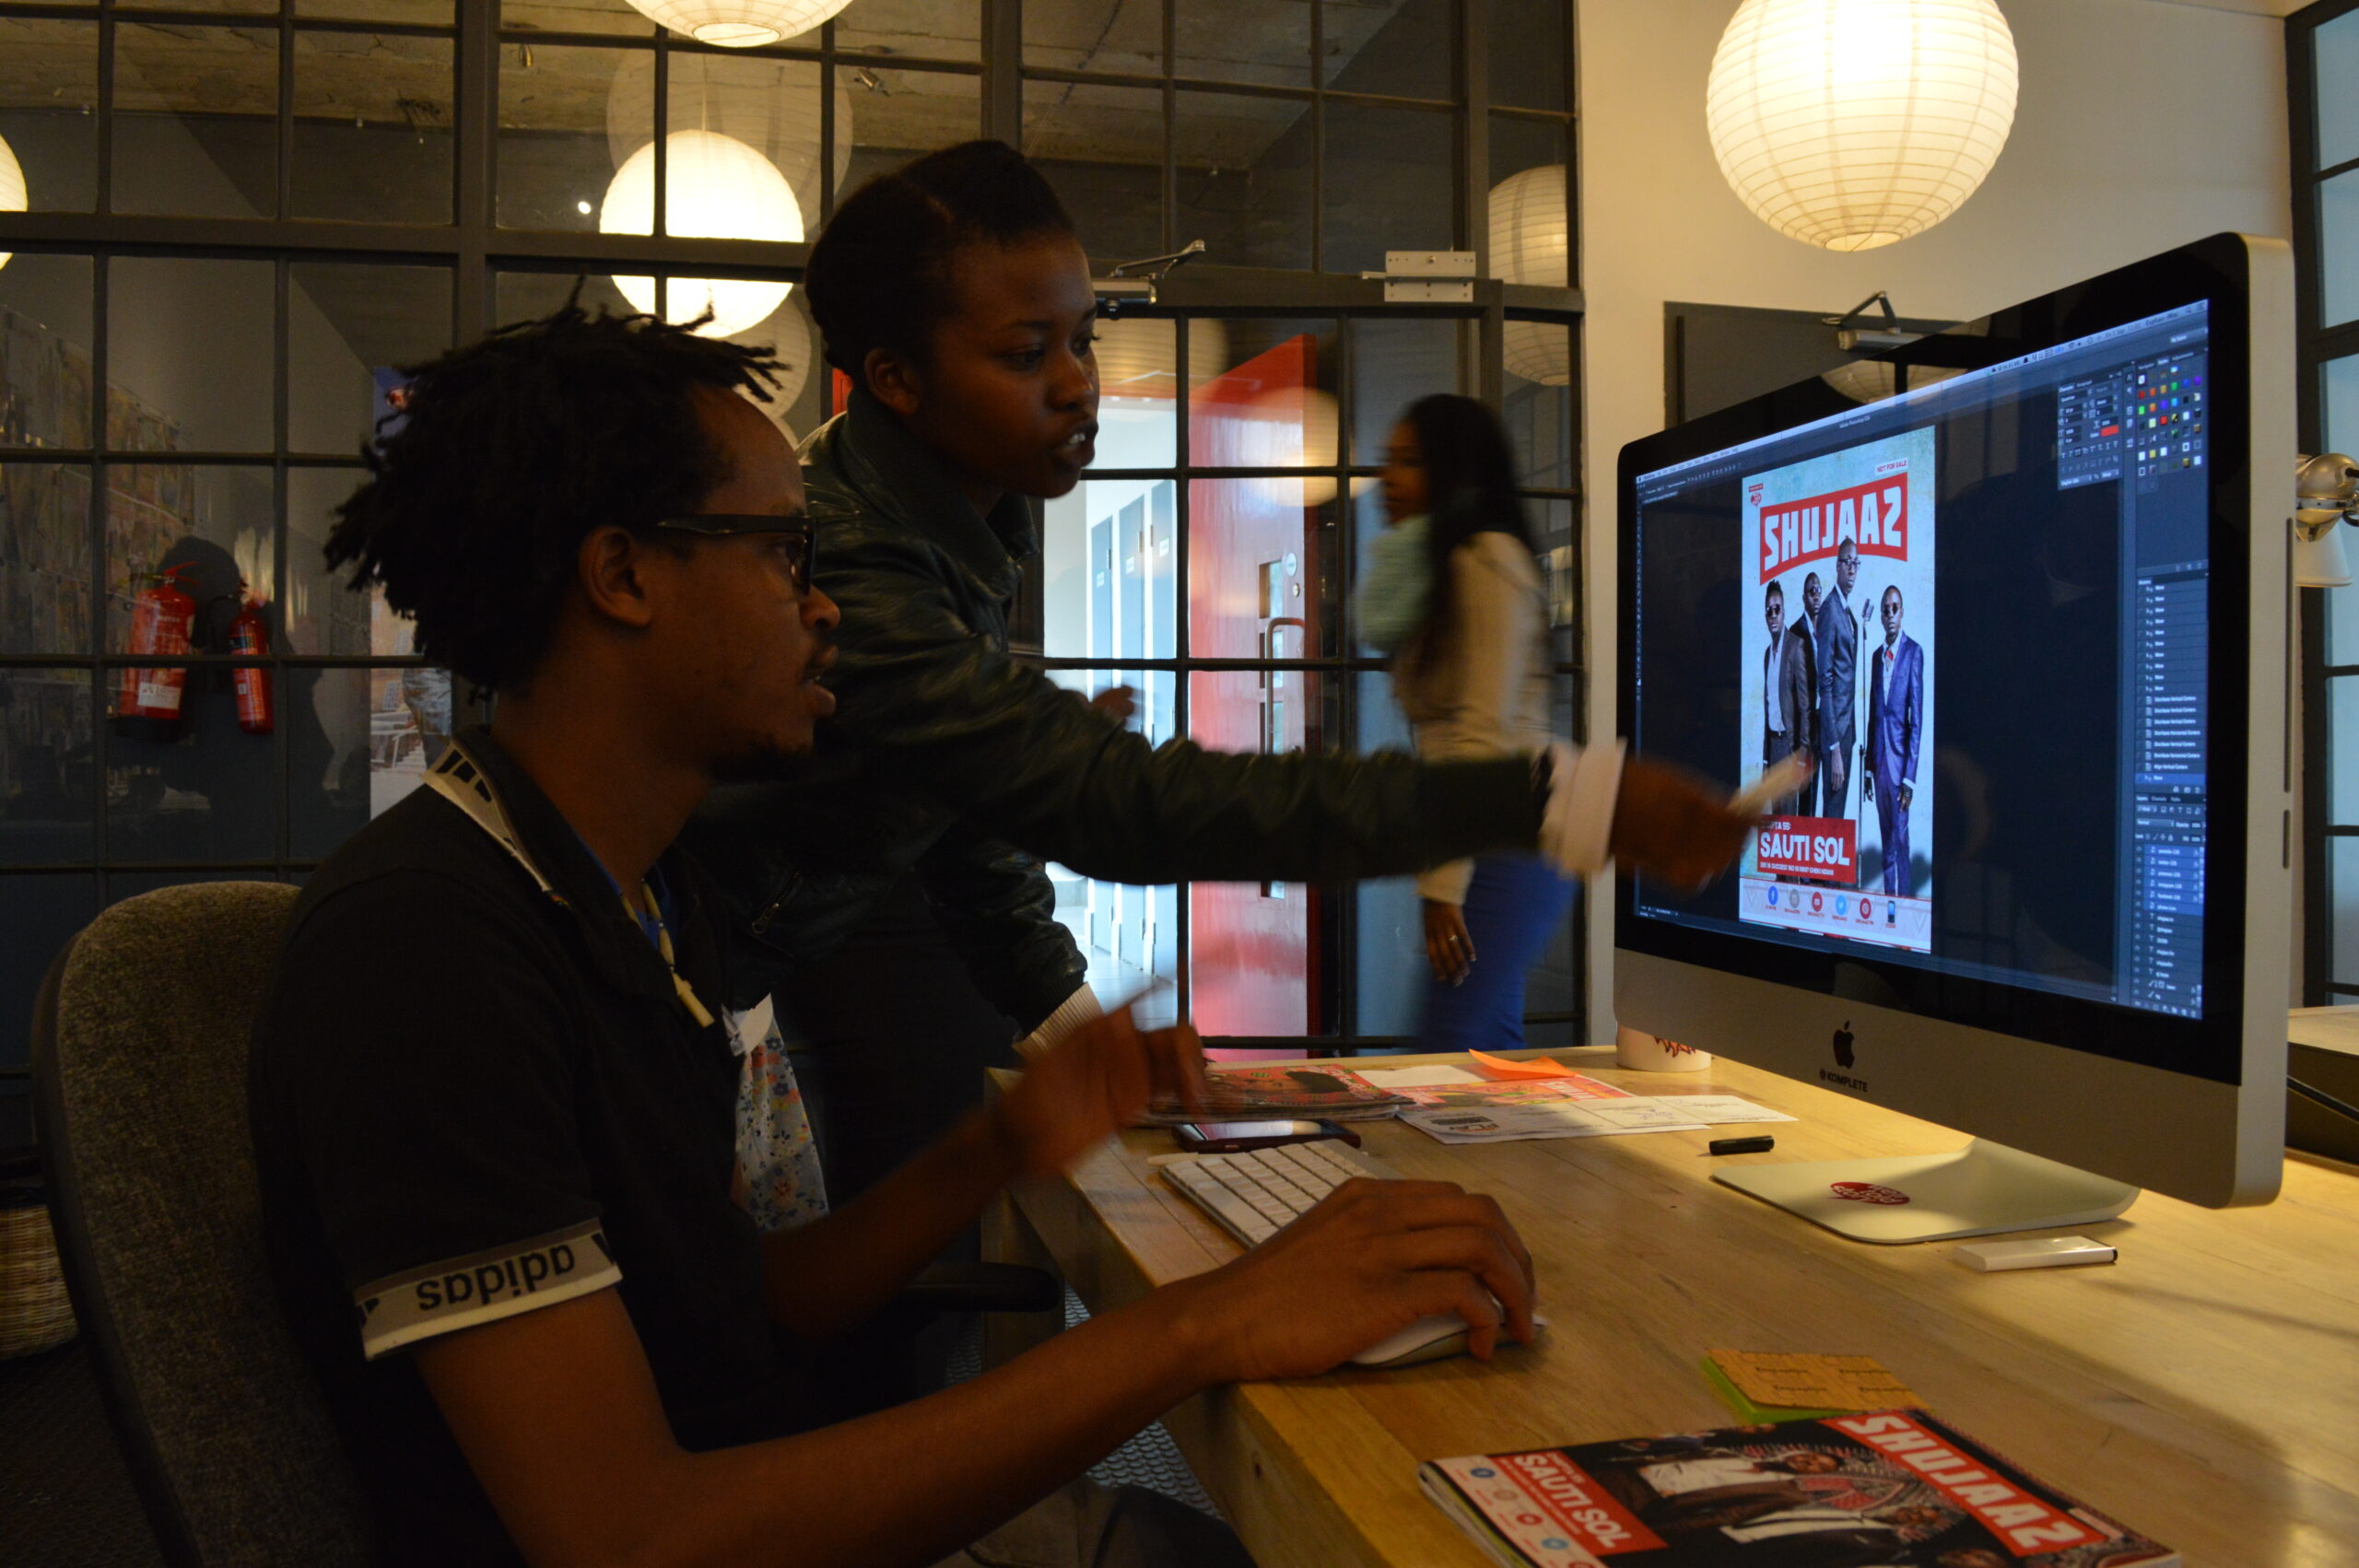 Partner with Hivos in Creative Expression for Democracy